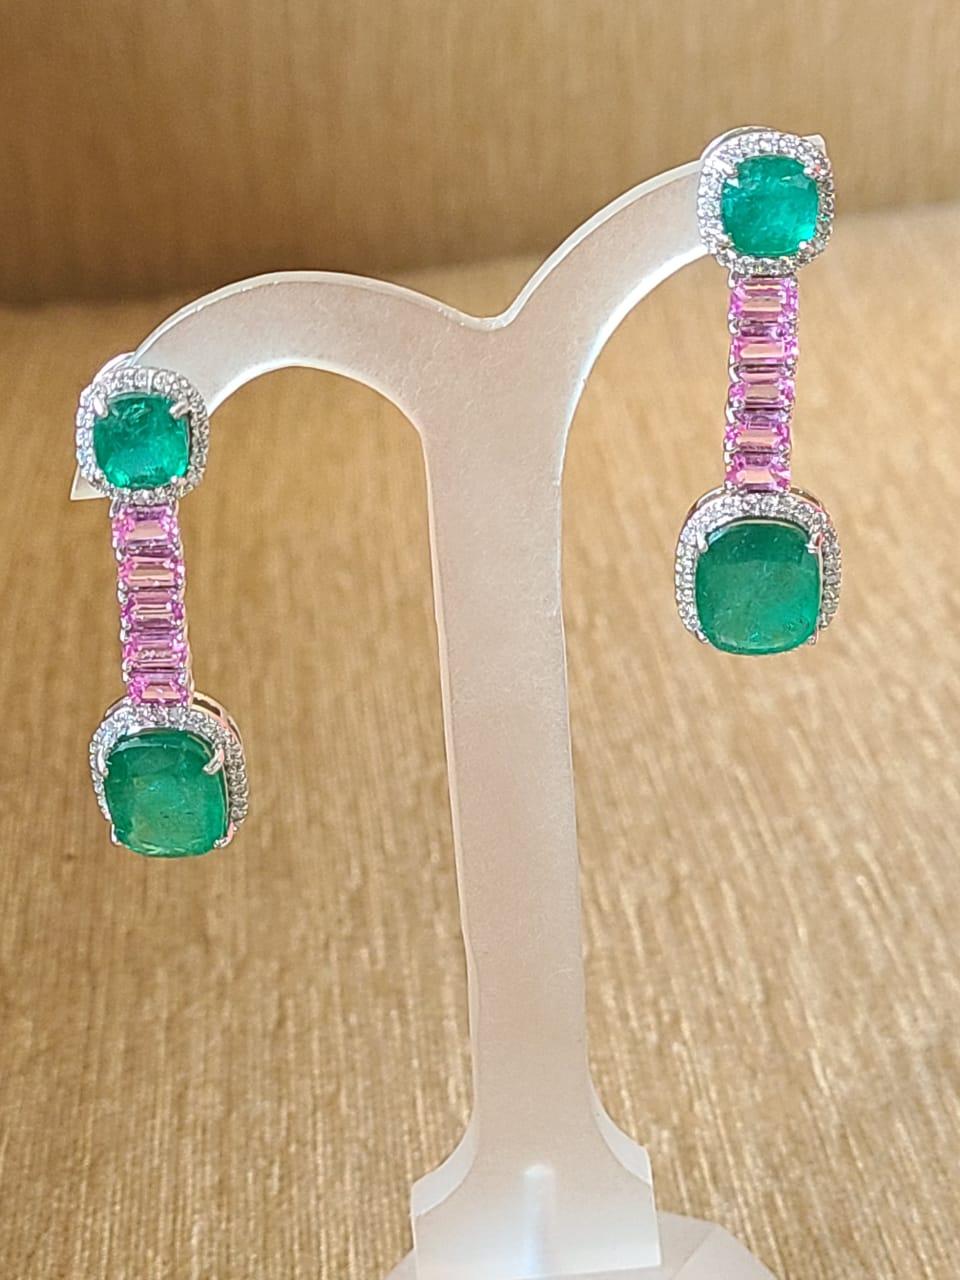 A very gorgeous Emerald and Pink Sapphire Dangle/ Drop earrings set in 18K Gold & Diamonds. The weight of the Emerald is 13.44 carats. The Emeralds are completely natural, without any treatment and of Zambian origin. The weight of the Pink Sapphires